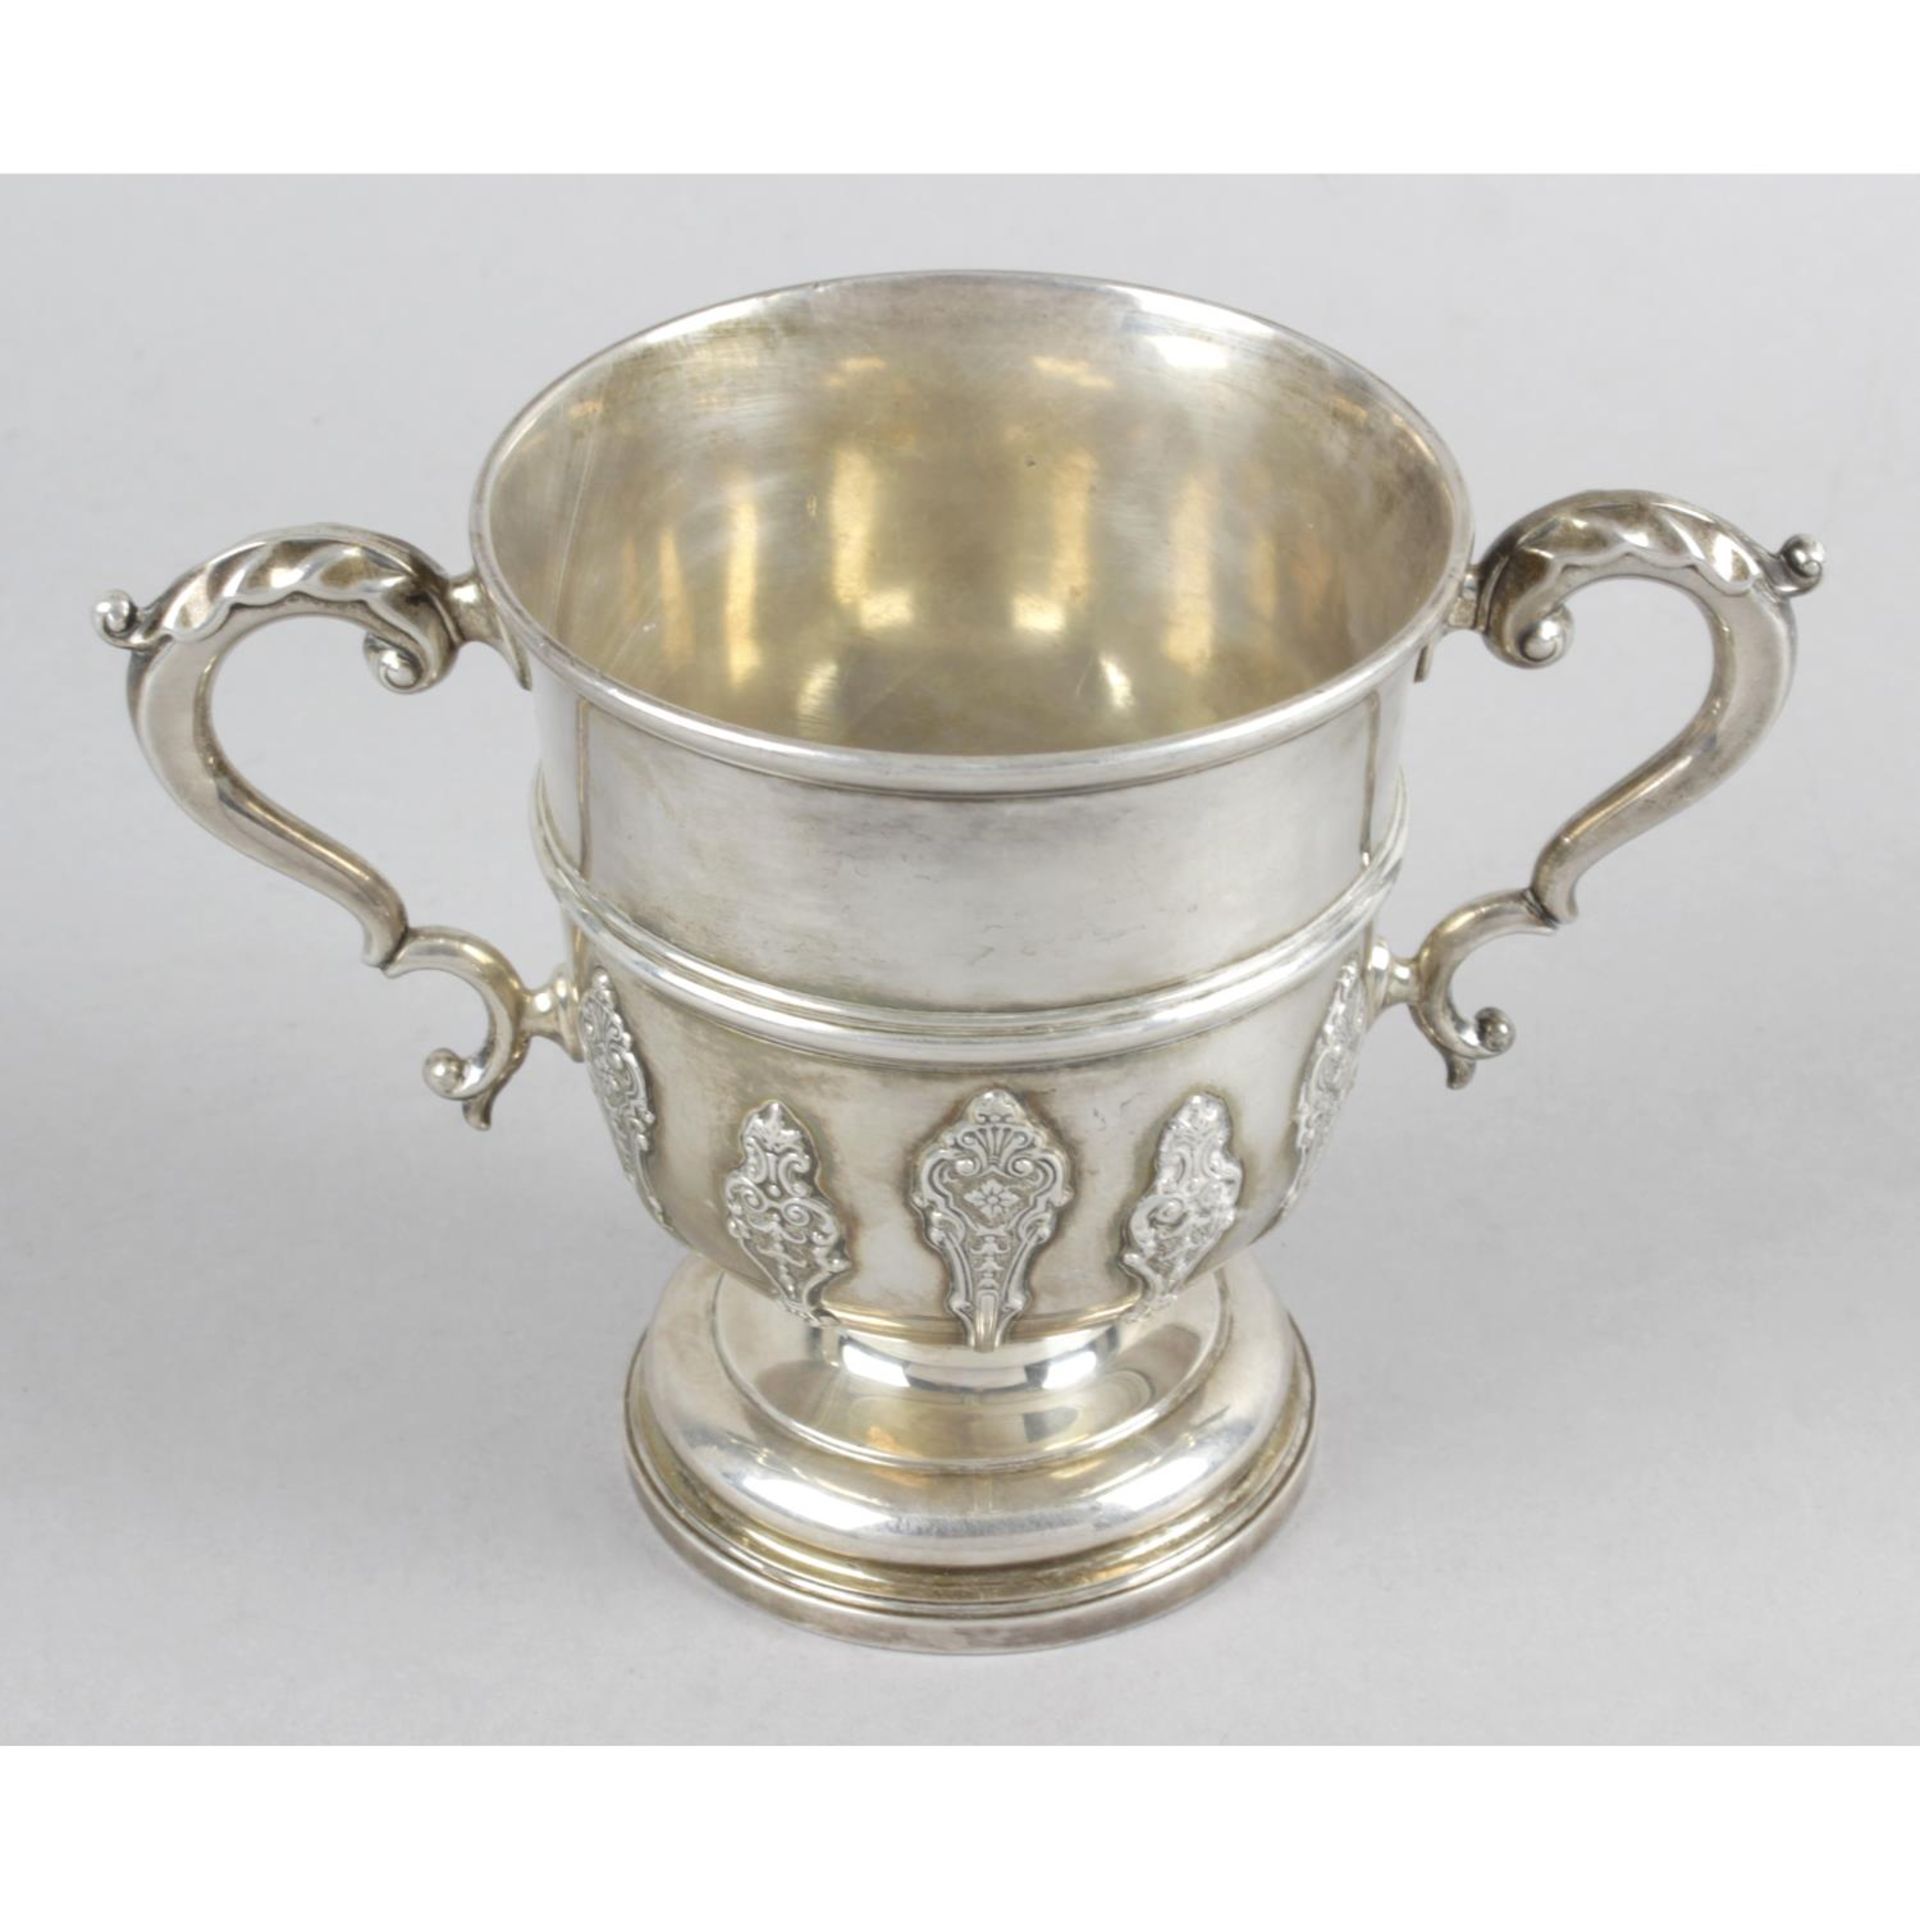 A 1920's silver loving cup,